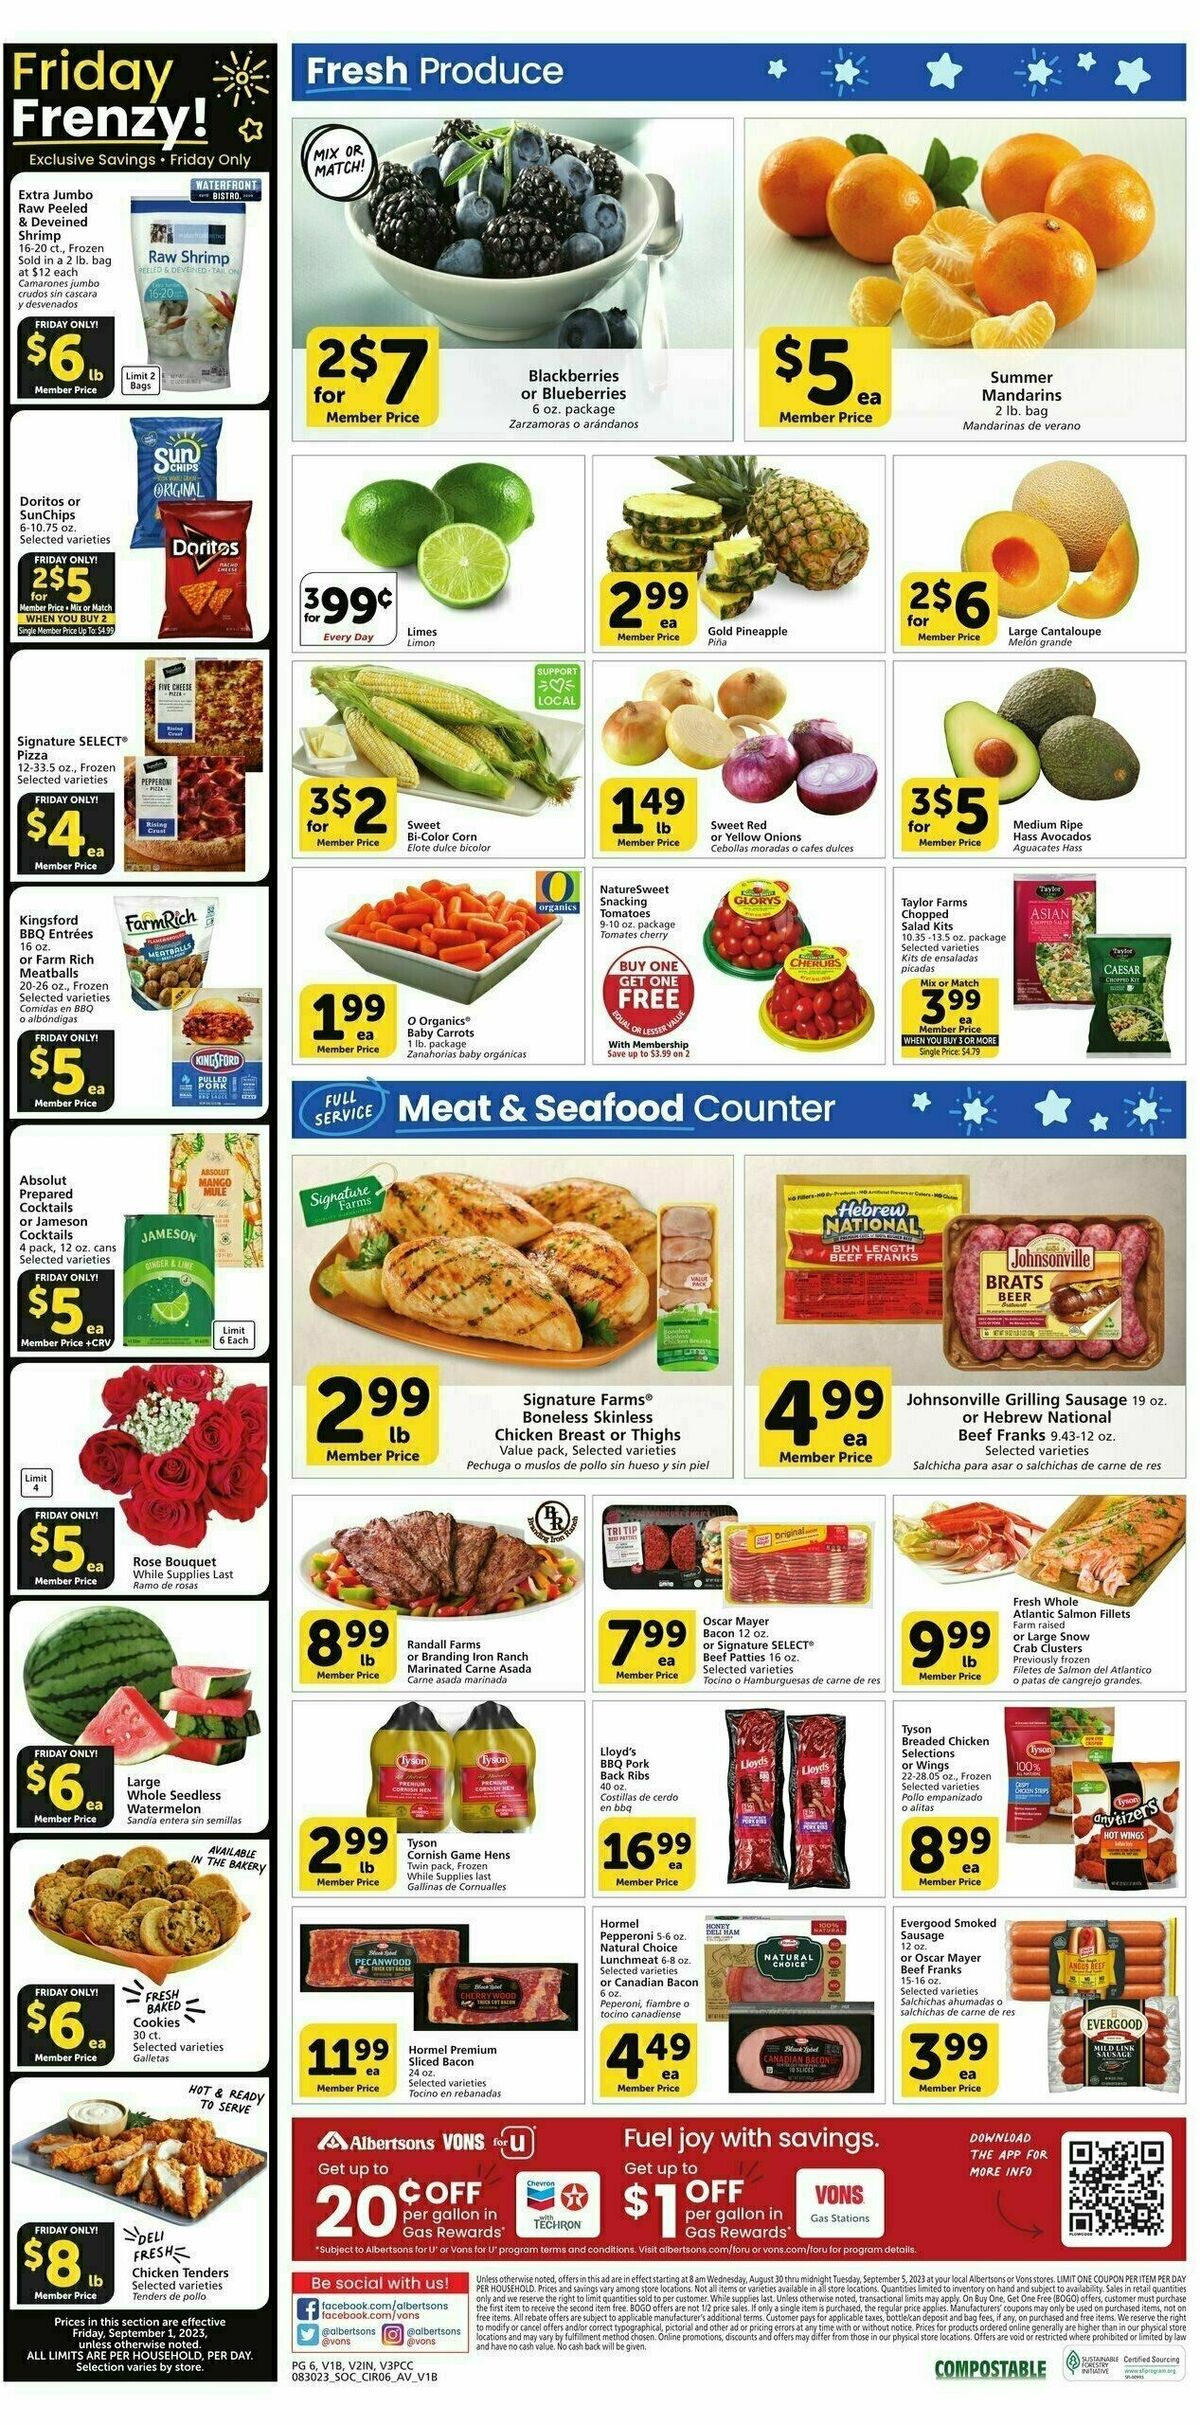 Vons Weekly Ad from August 30